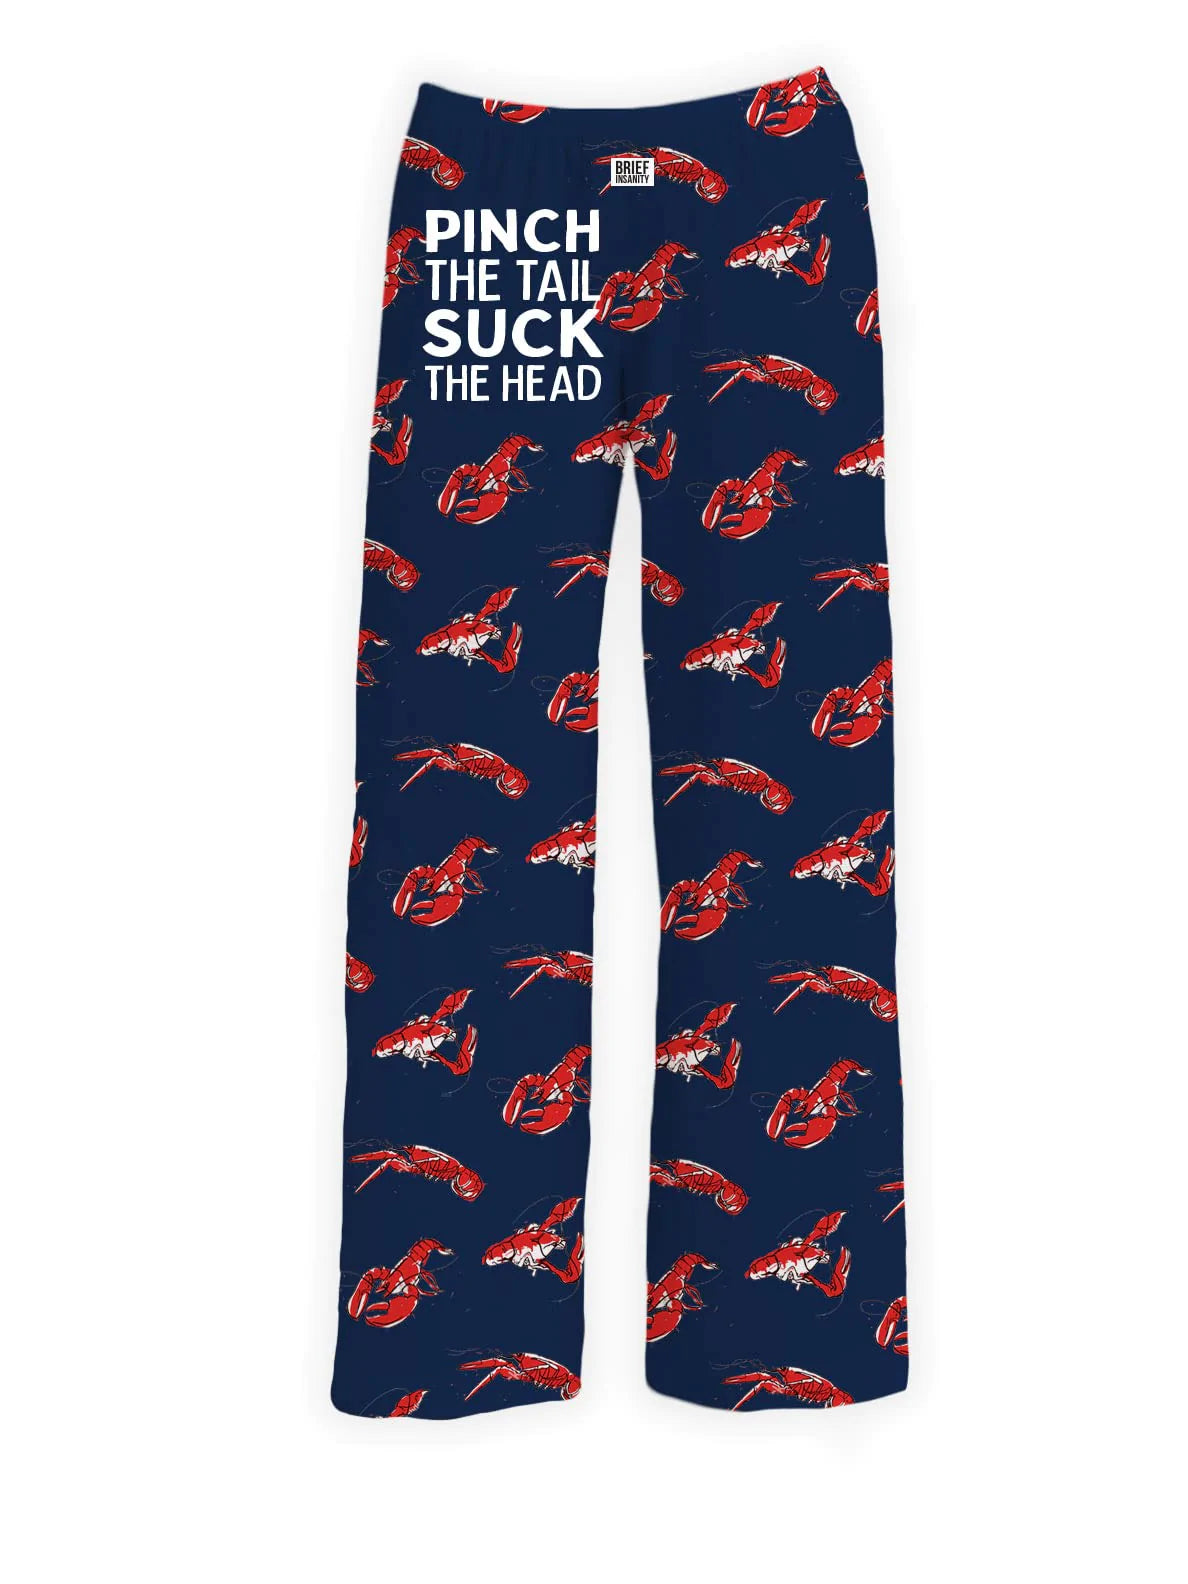 Pinch the Tail, Suck The Head Lounge Pant